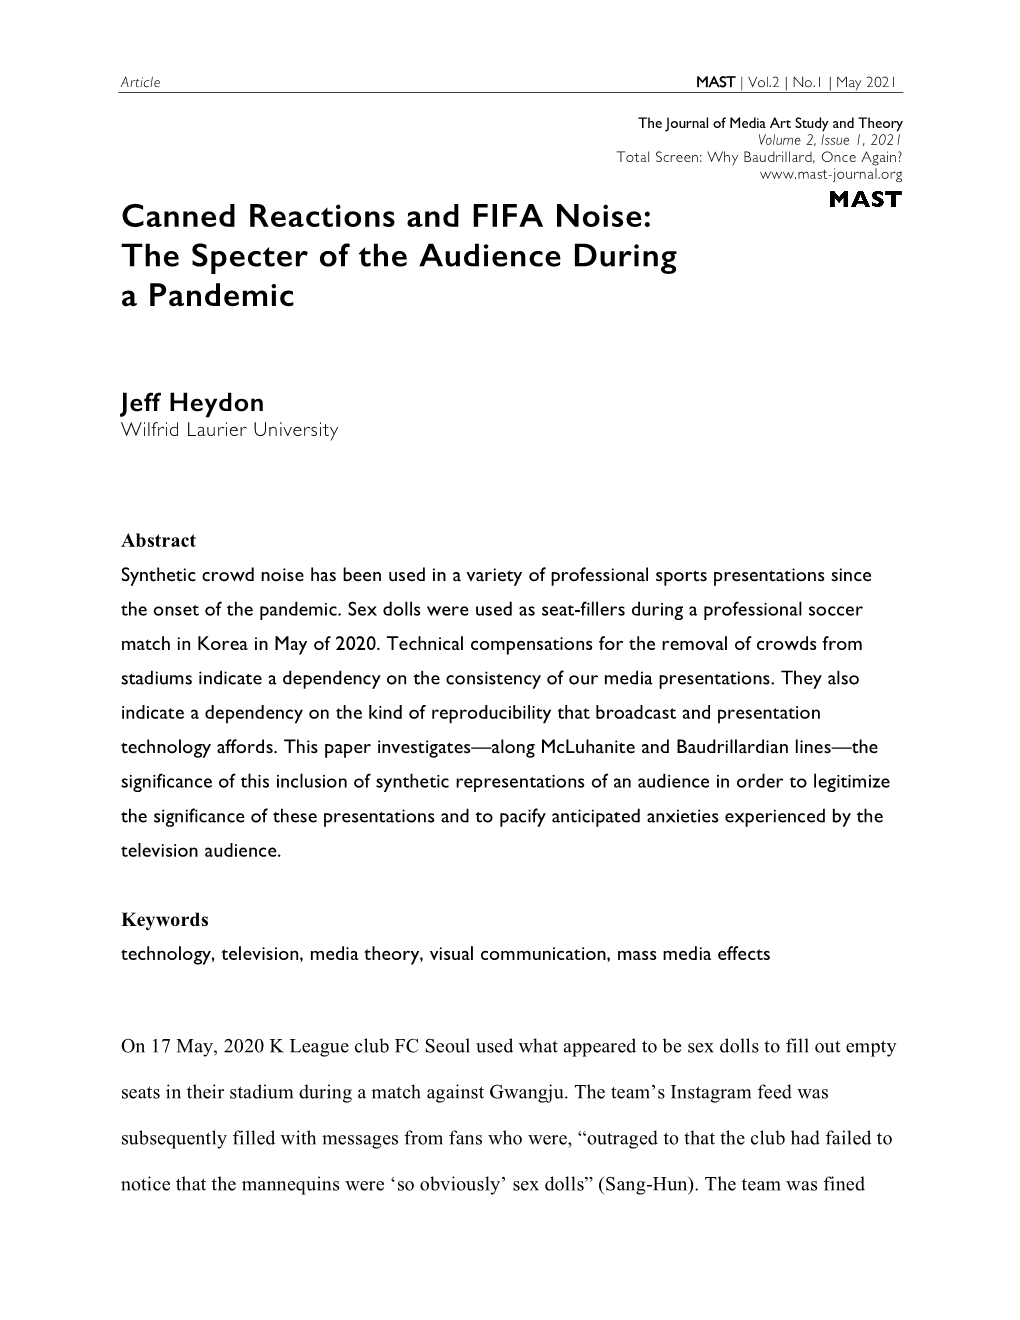 Canned Reactions and FIFA Noise: the Specter of the Audience During a Pandemic